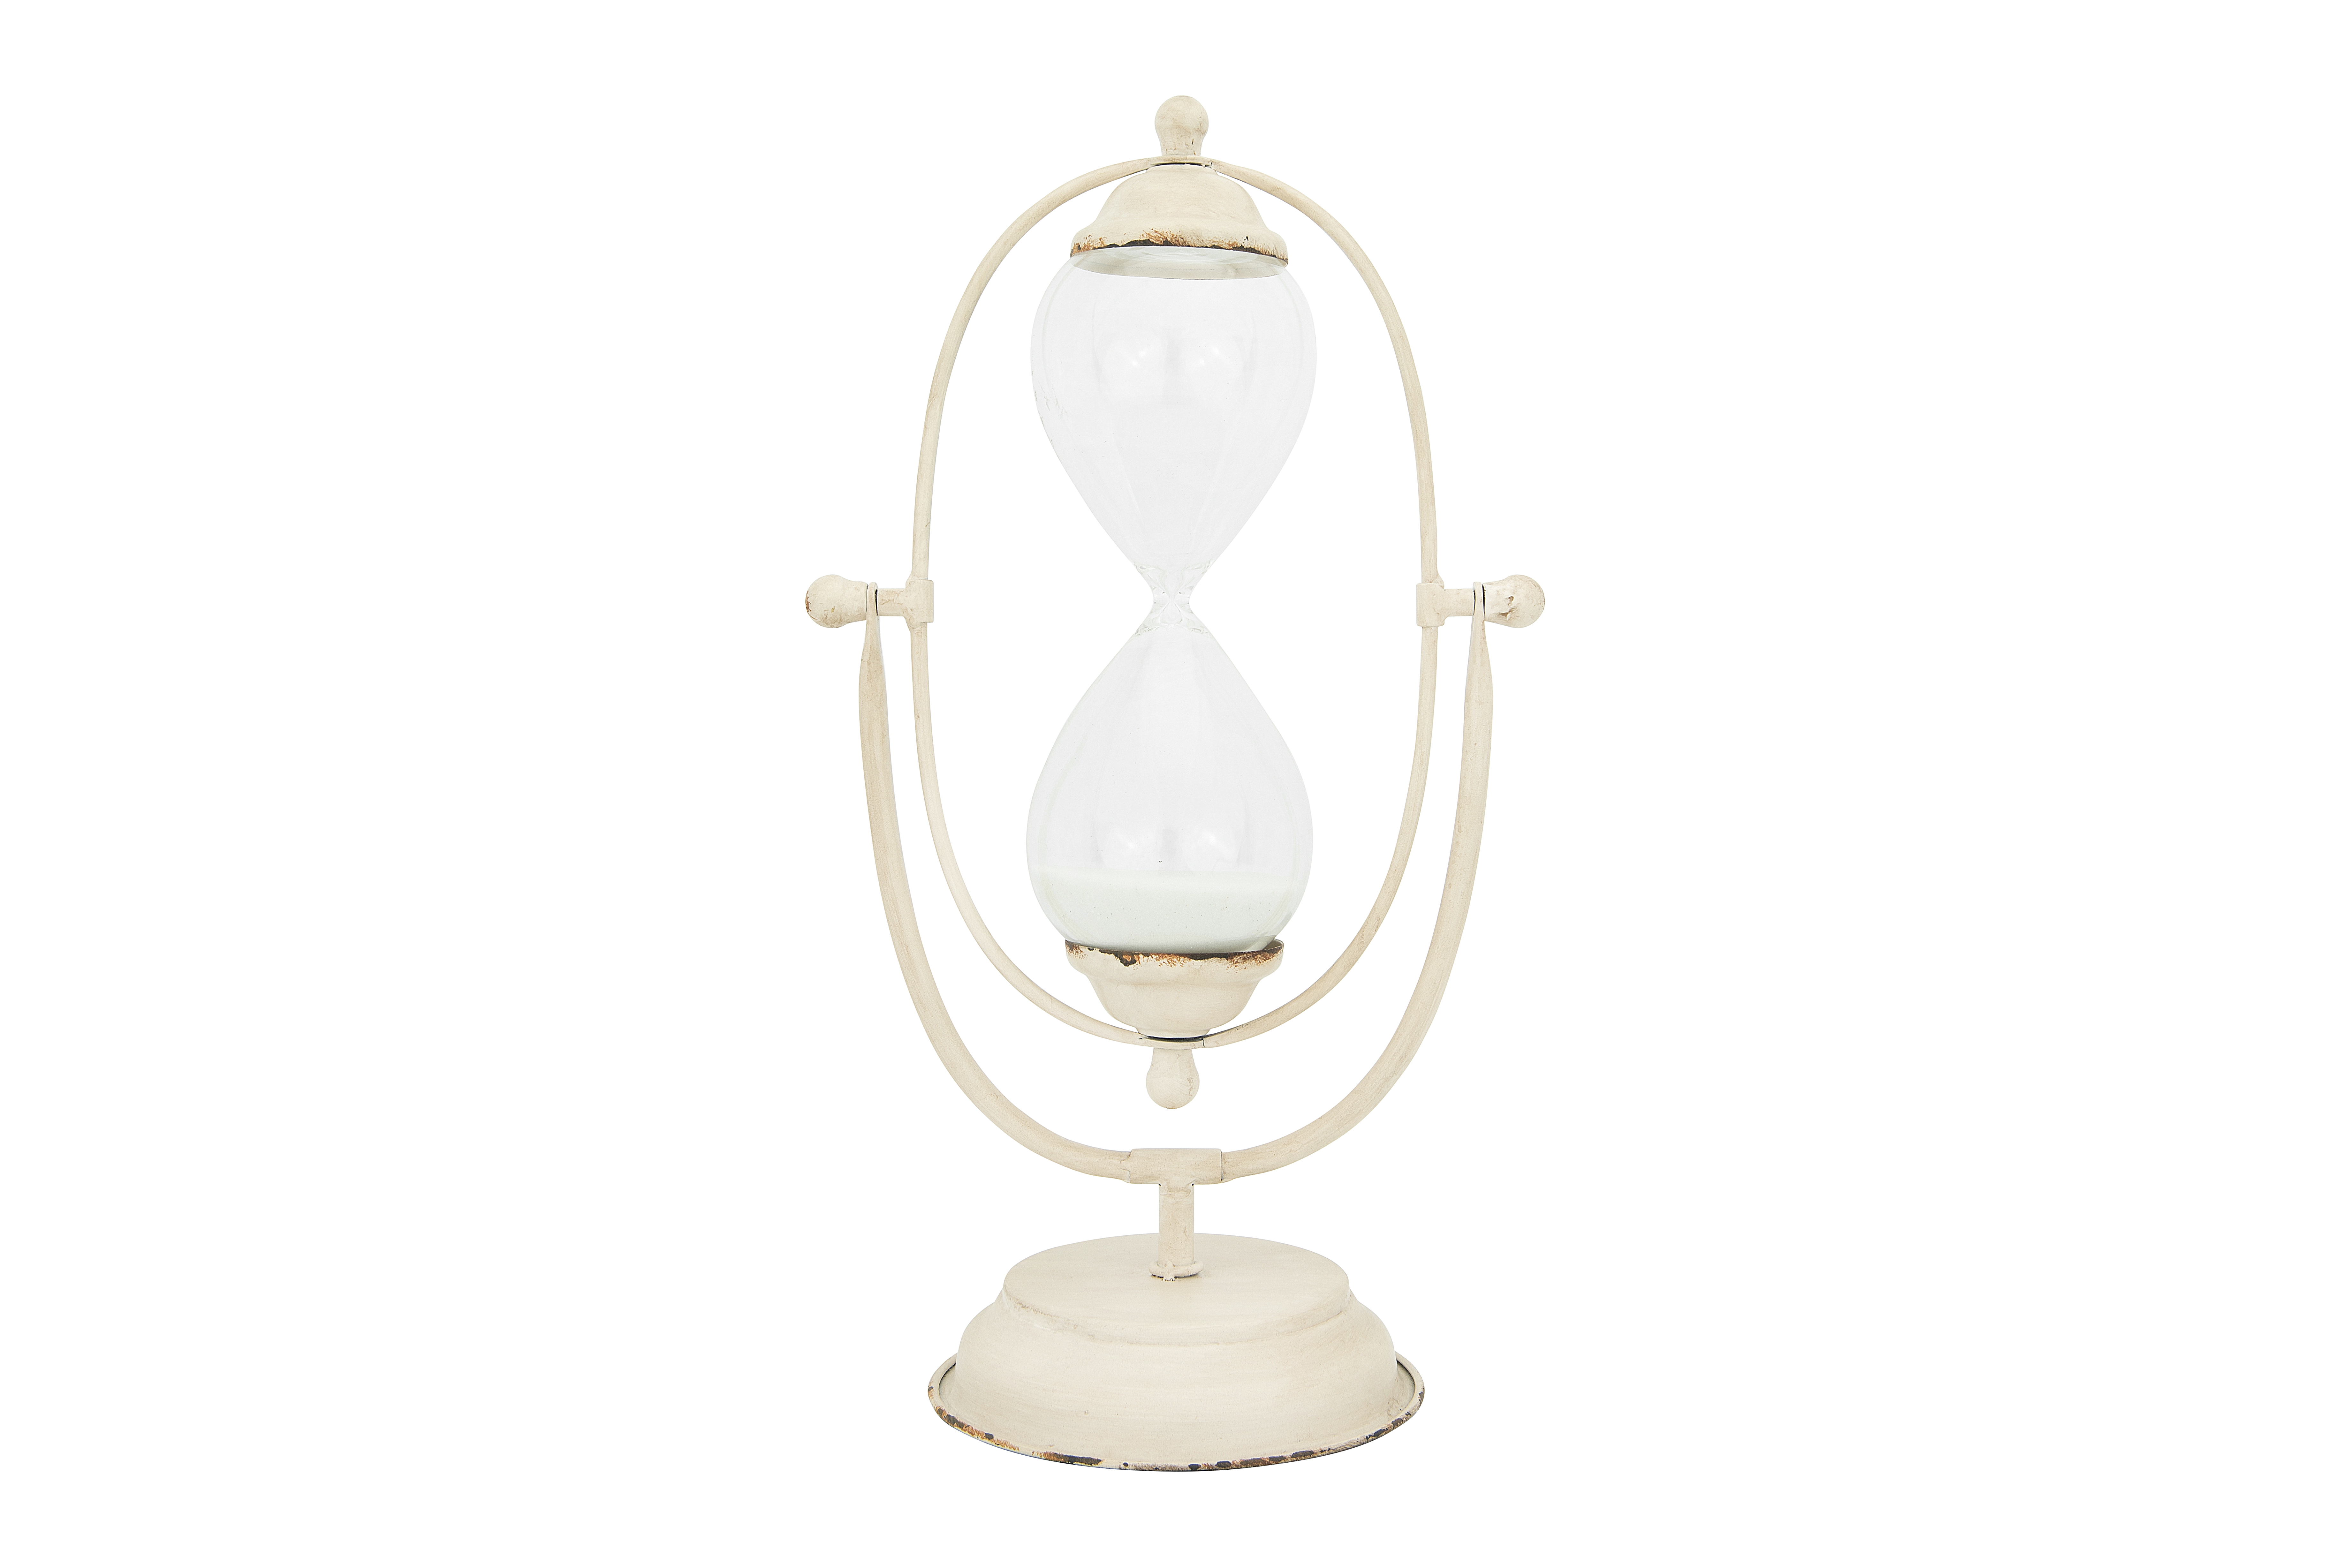 Decorative Antique Cream Metal Hourglass with White Sand - Image 0